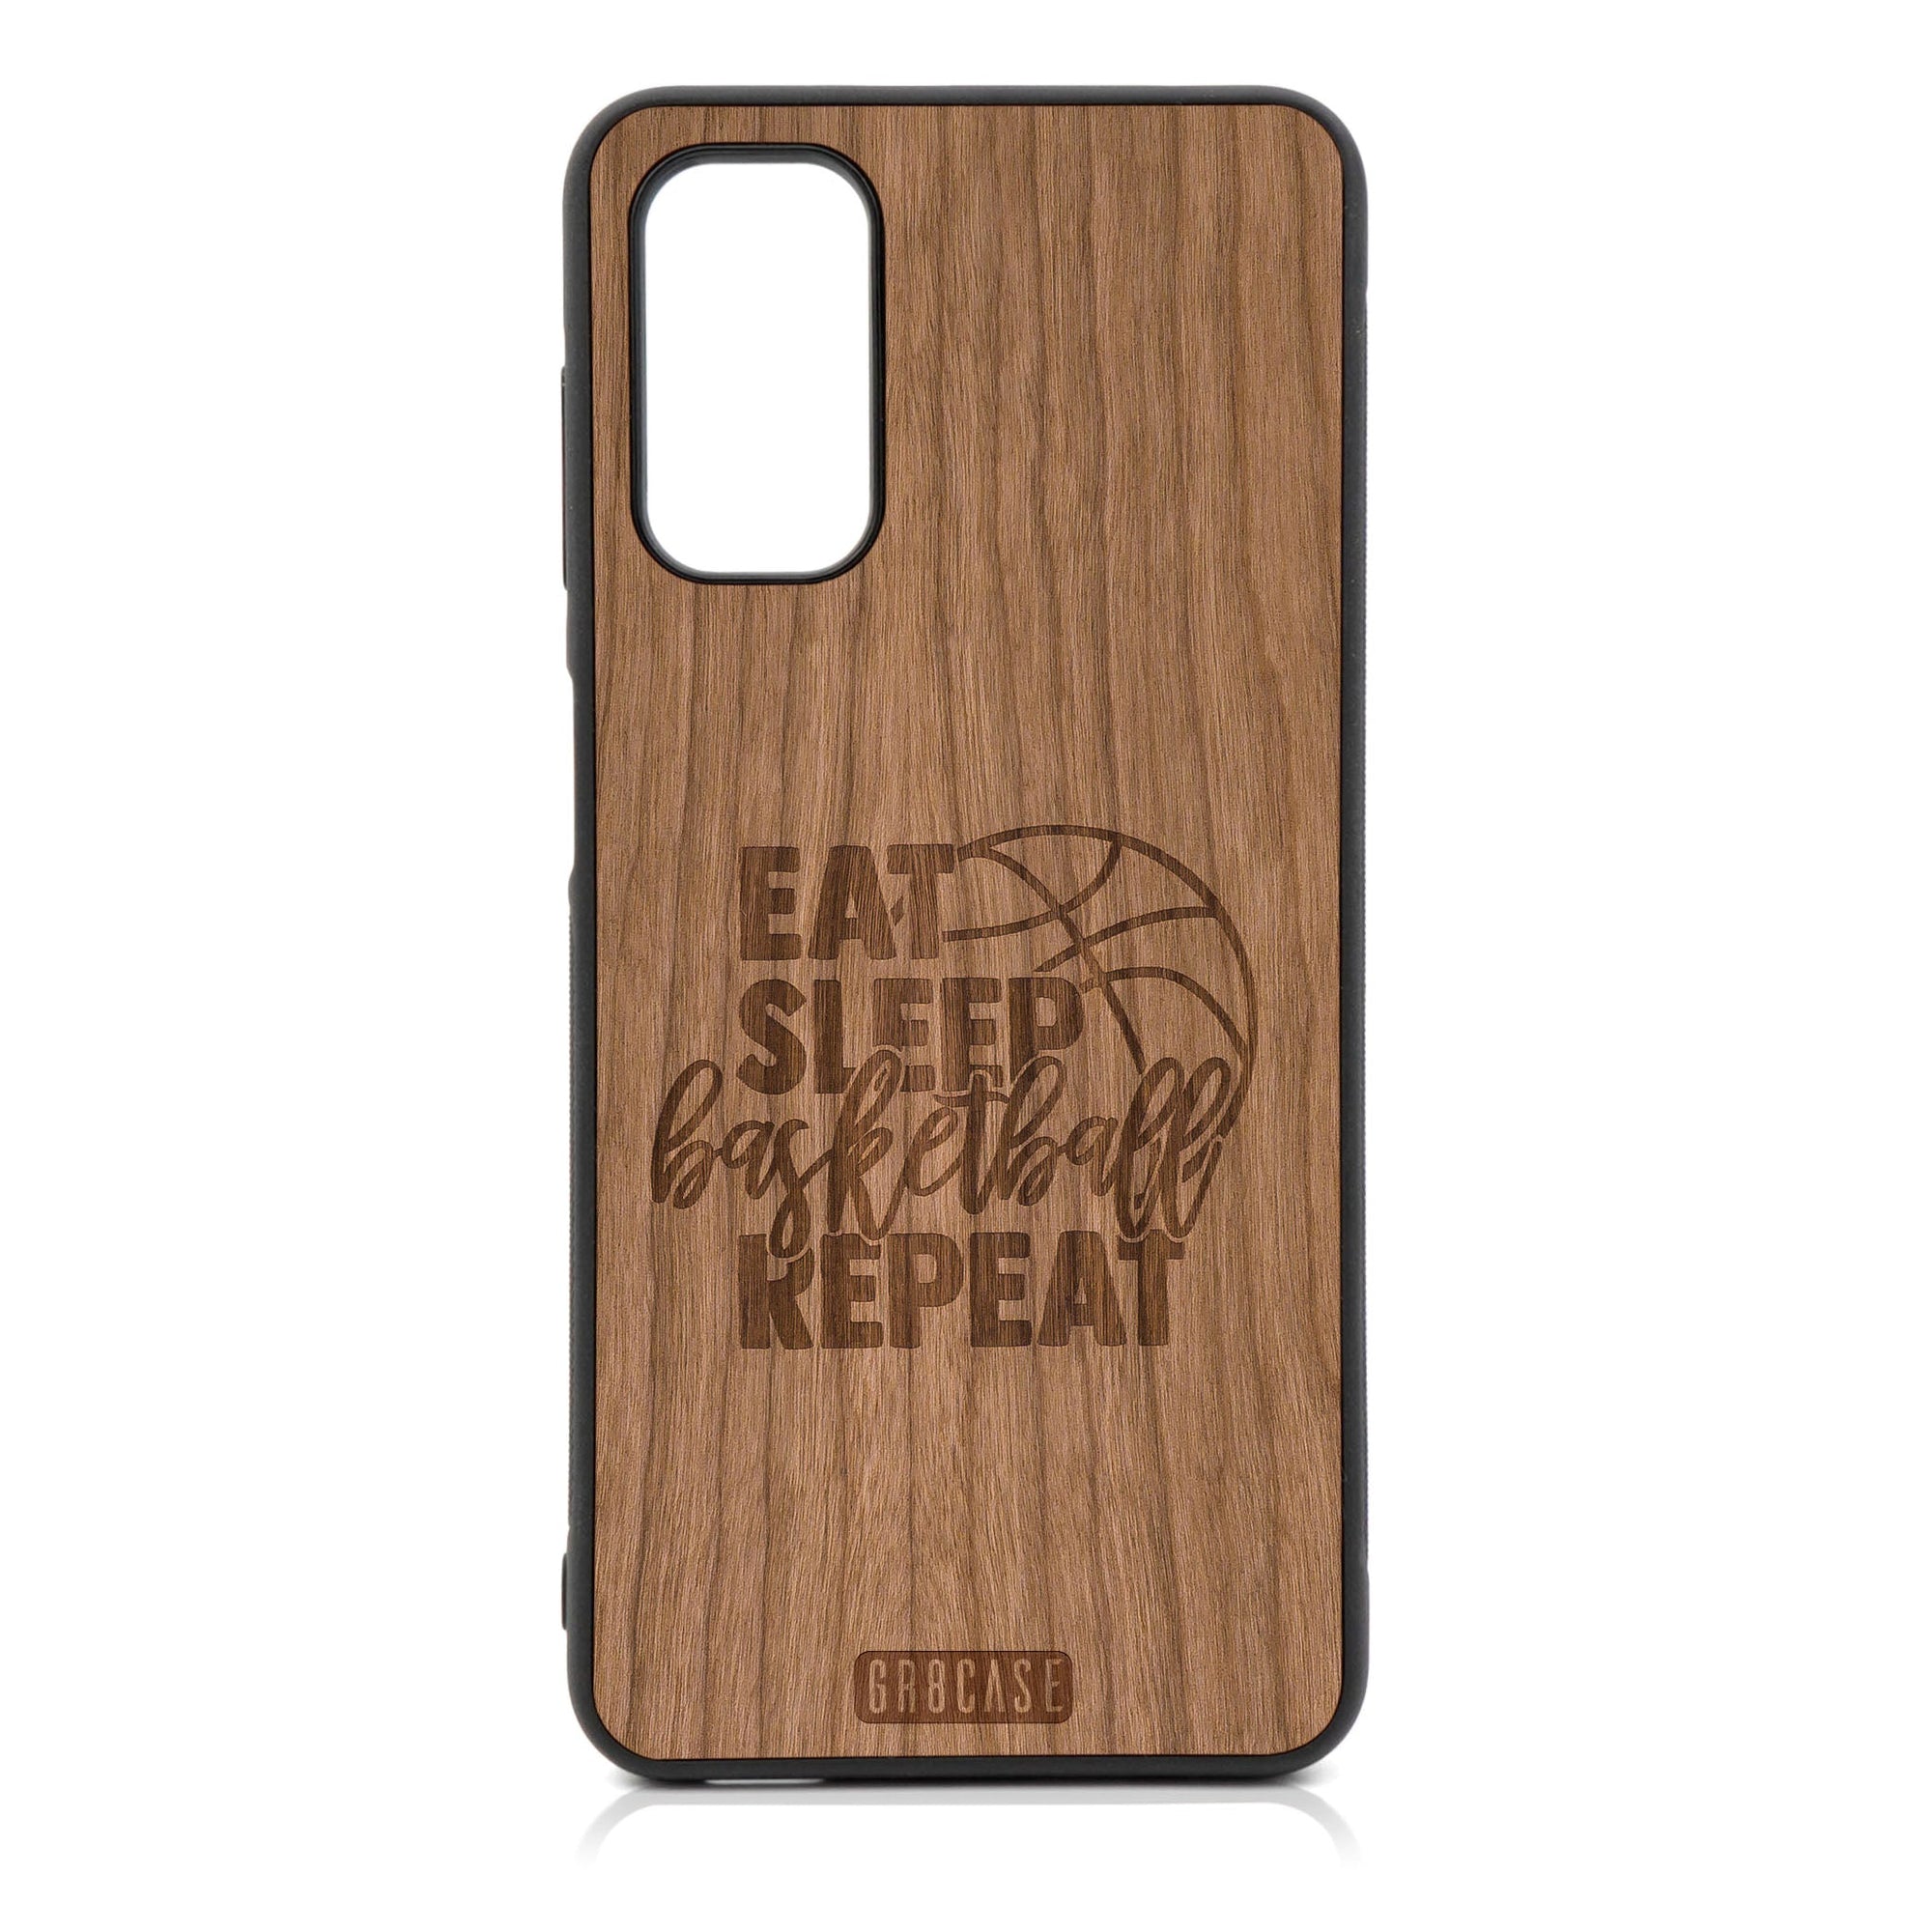 Eat Sleep Basketball Repeat Design Wood Case For Galaxy A14 5G